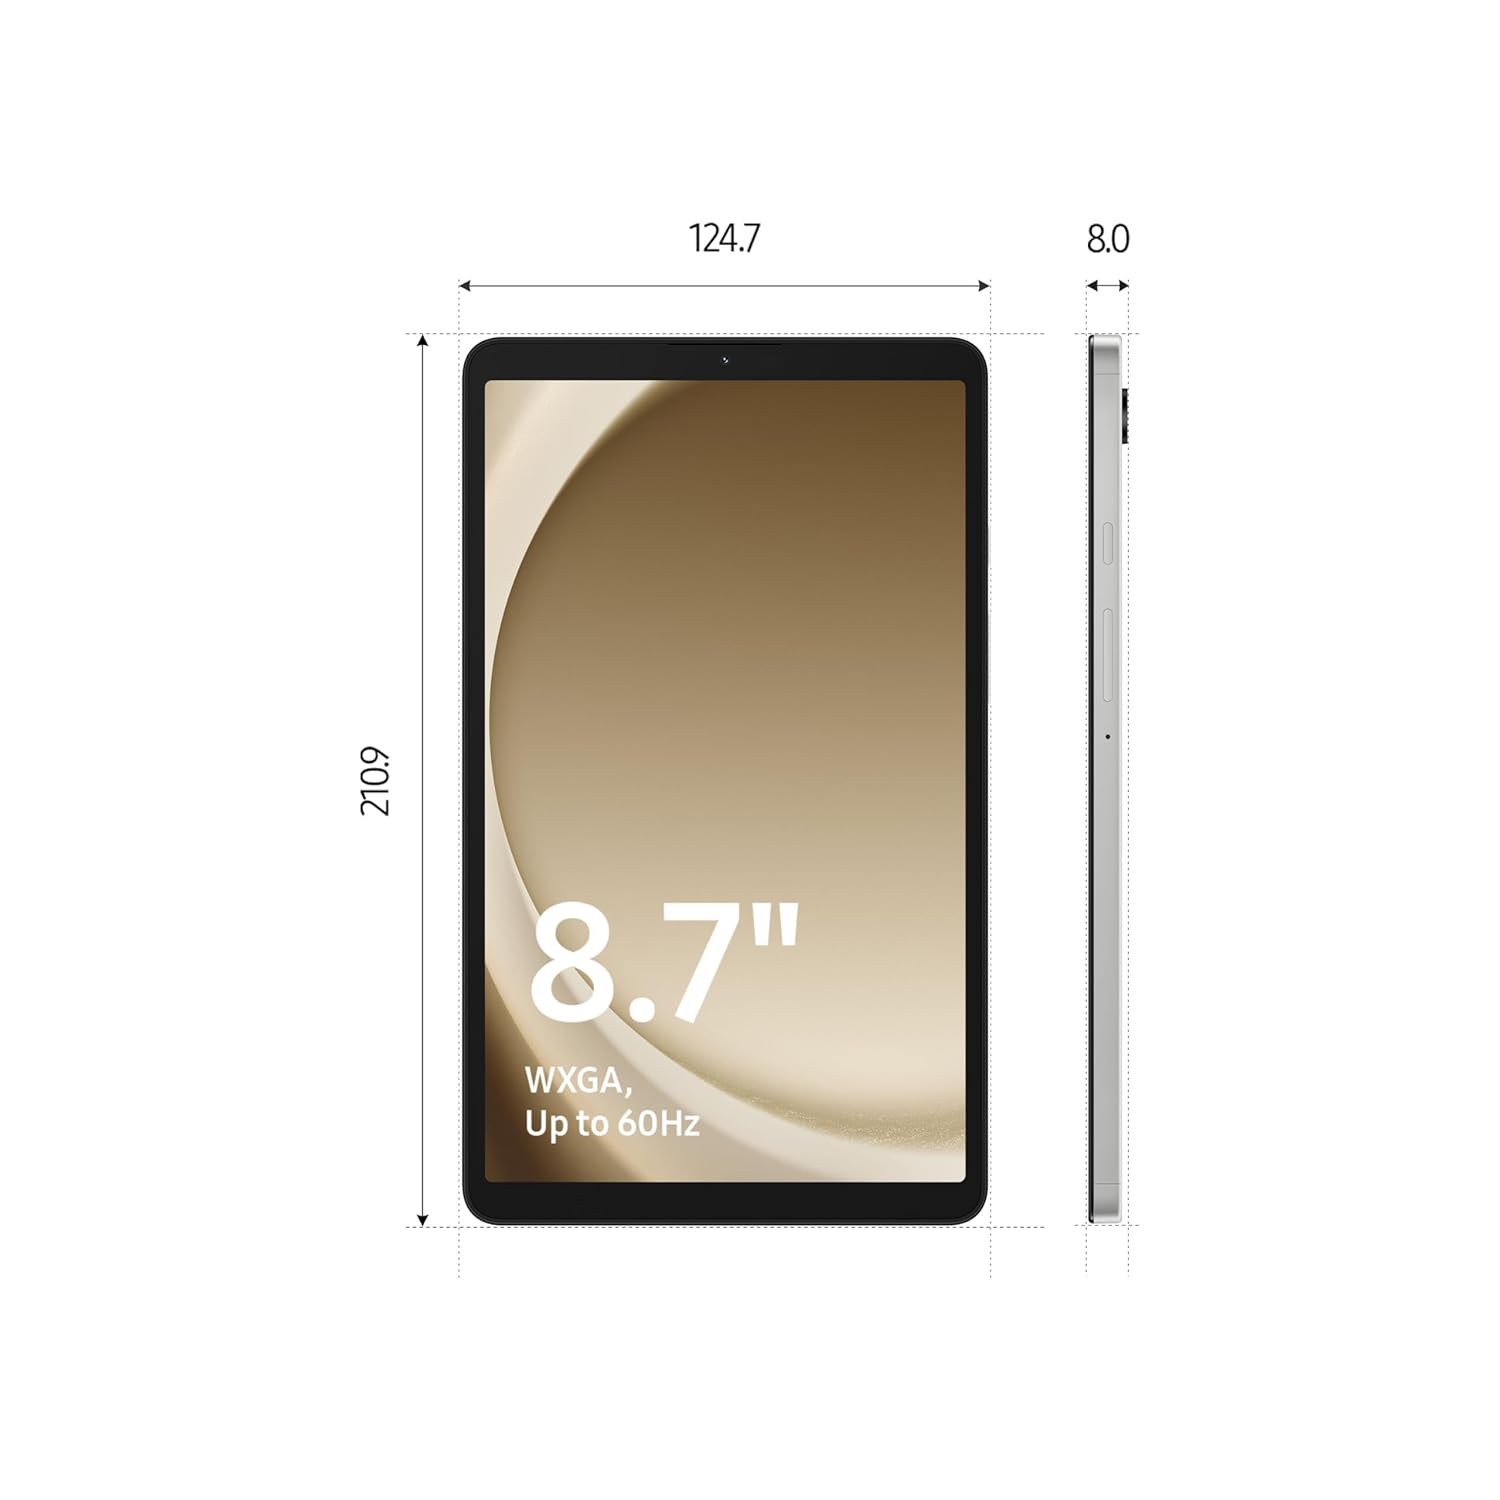 Samsung Galaxy Tab A9, Tab A9 Plus launched with 5G support